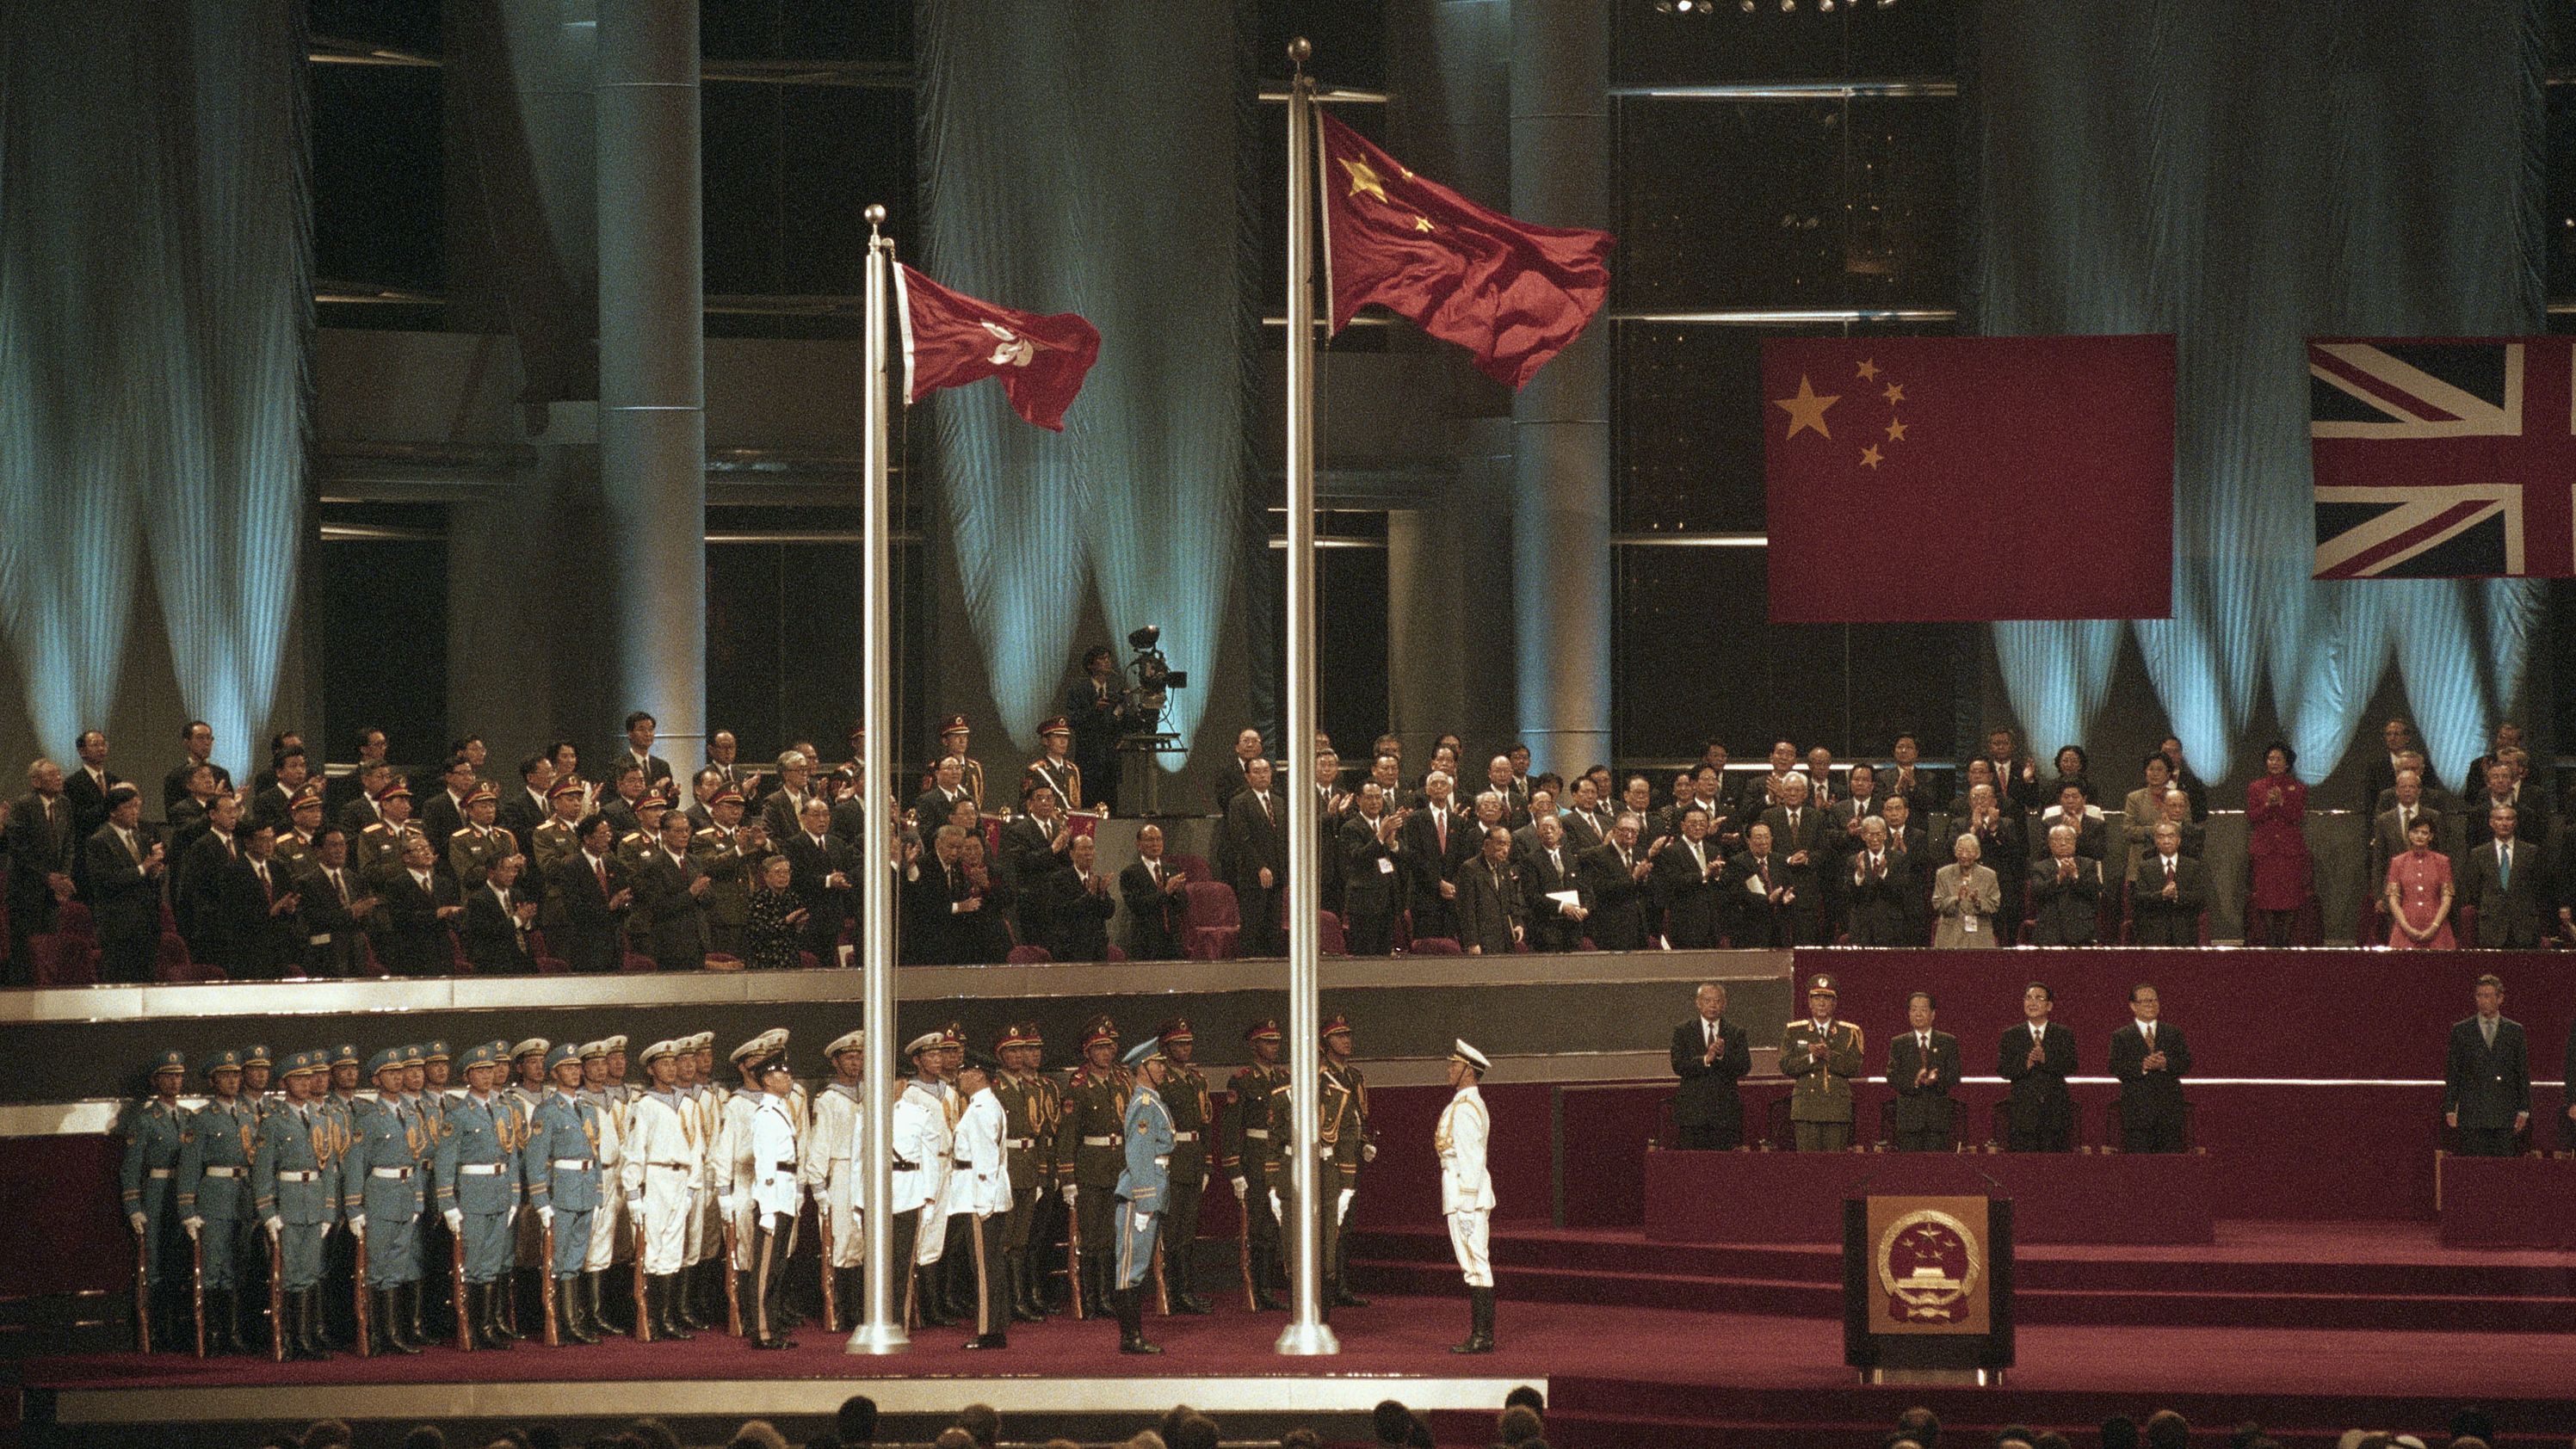 A ceremony is held for the Hong Kong handover on July 1, 1997.